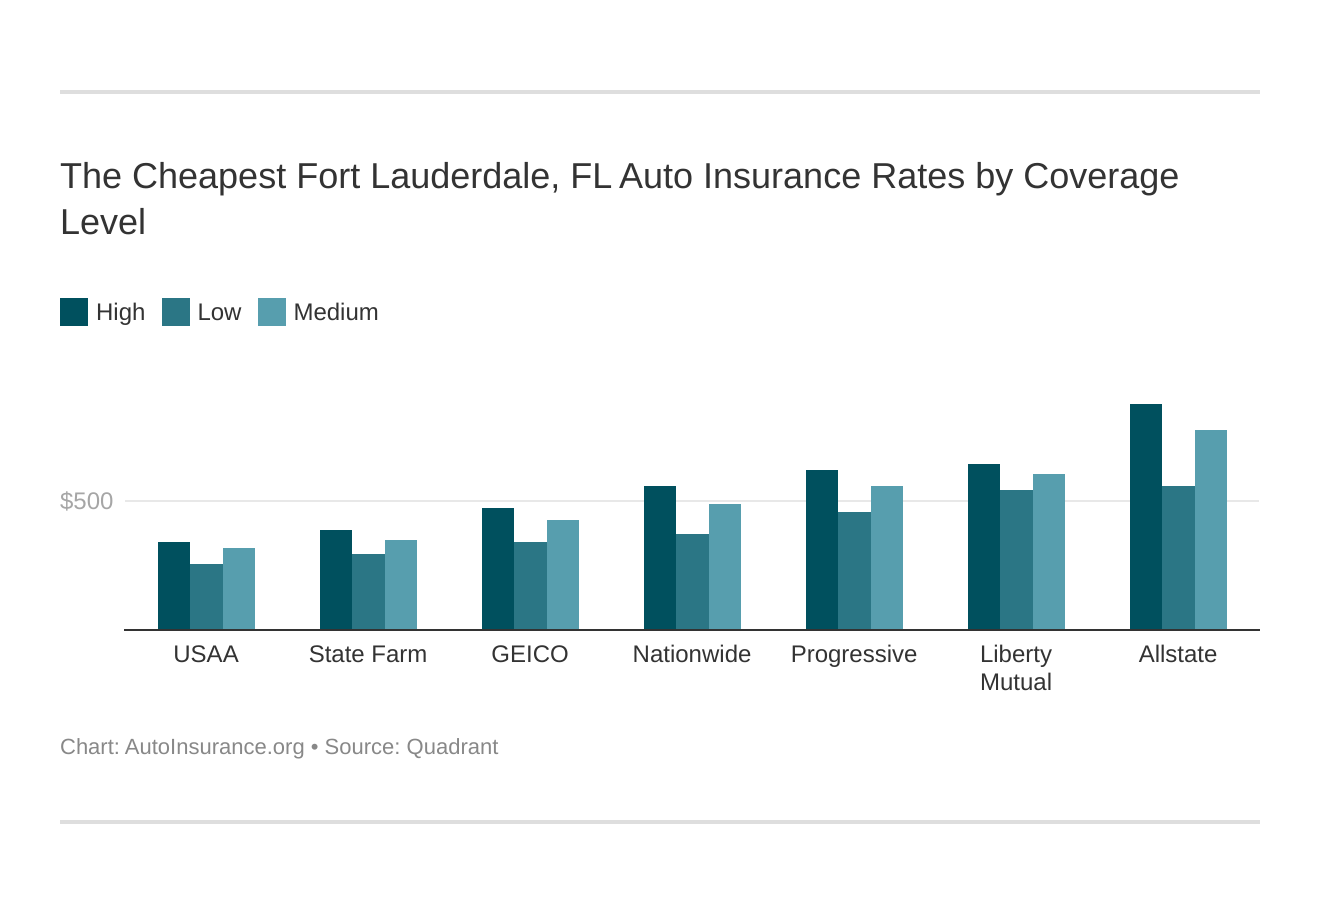 The Cheapest Fort Lauderdale, FL Auto Insurance Rates by Coverage Level